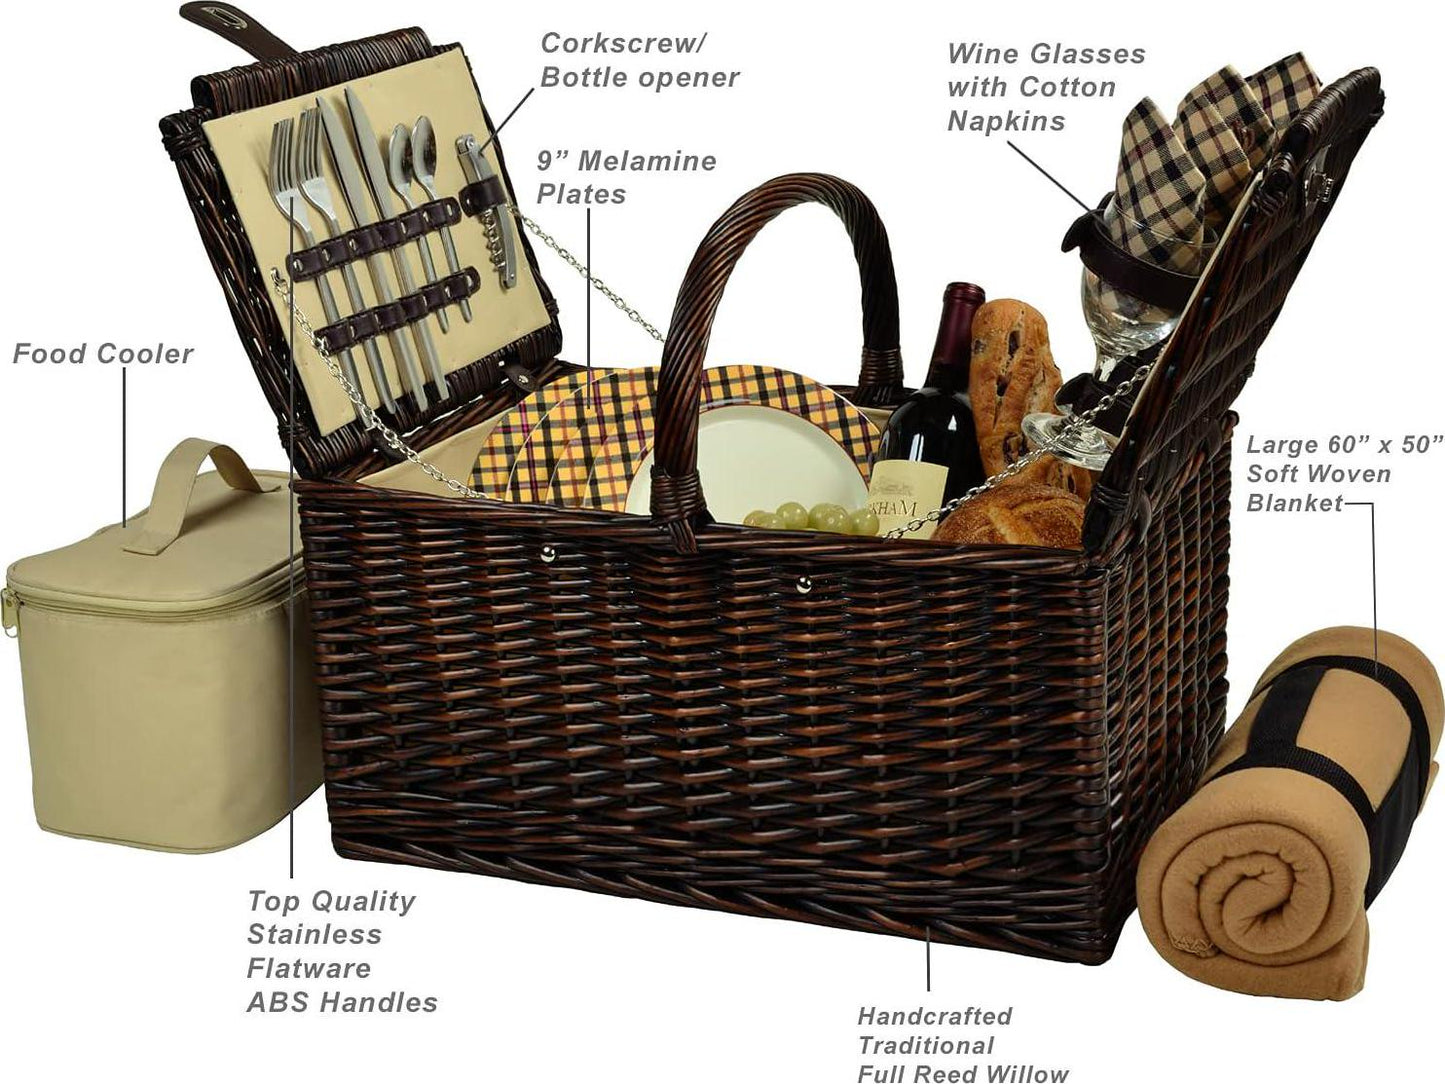 Picnic at Ascot Buckingham Willow Picnic Basket with Service for 4 with Blanket- London Plaid